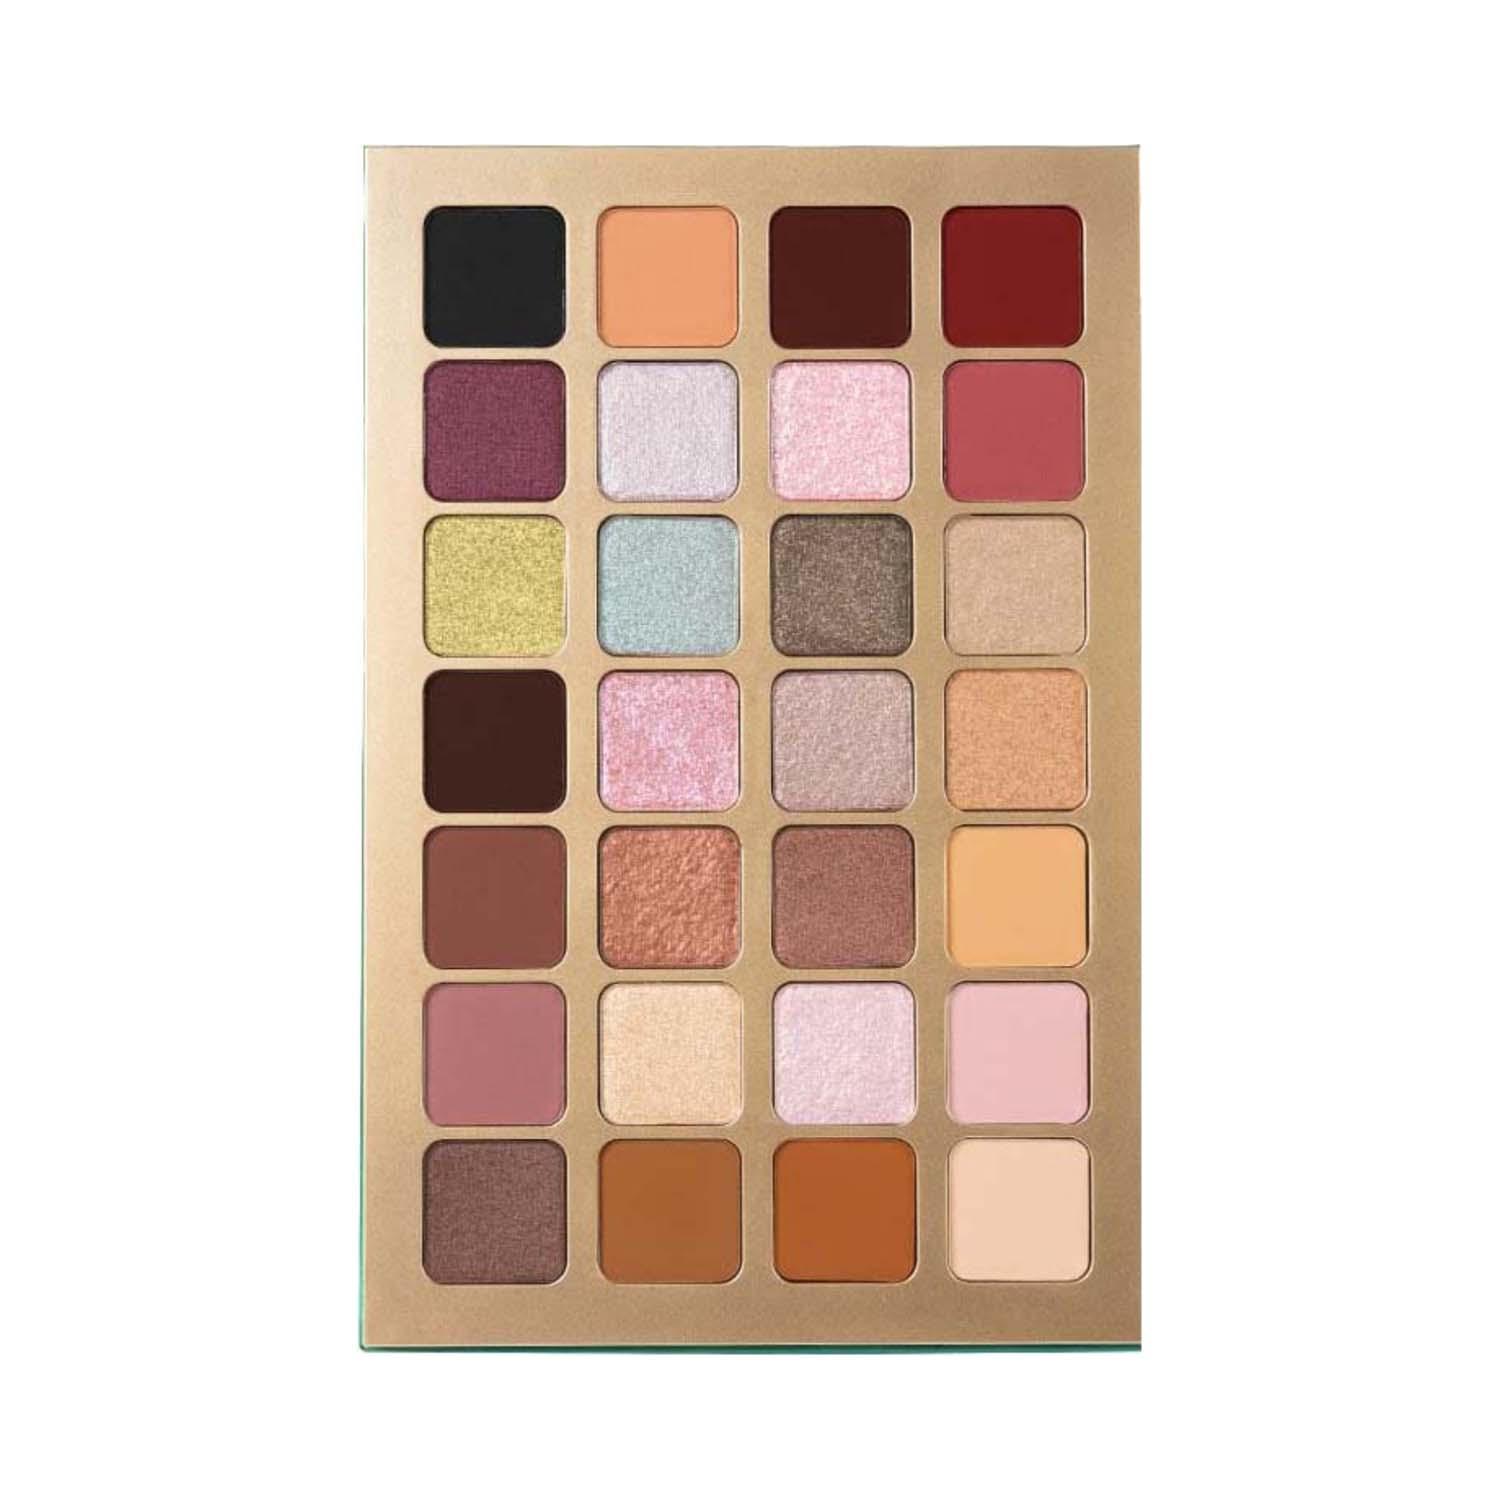 Daily Life Forever52 | Daily Life Forever52 28 Color Intense Eyeshadow Palette - 002 Martinique (50.4 g)